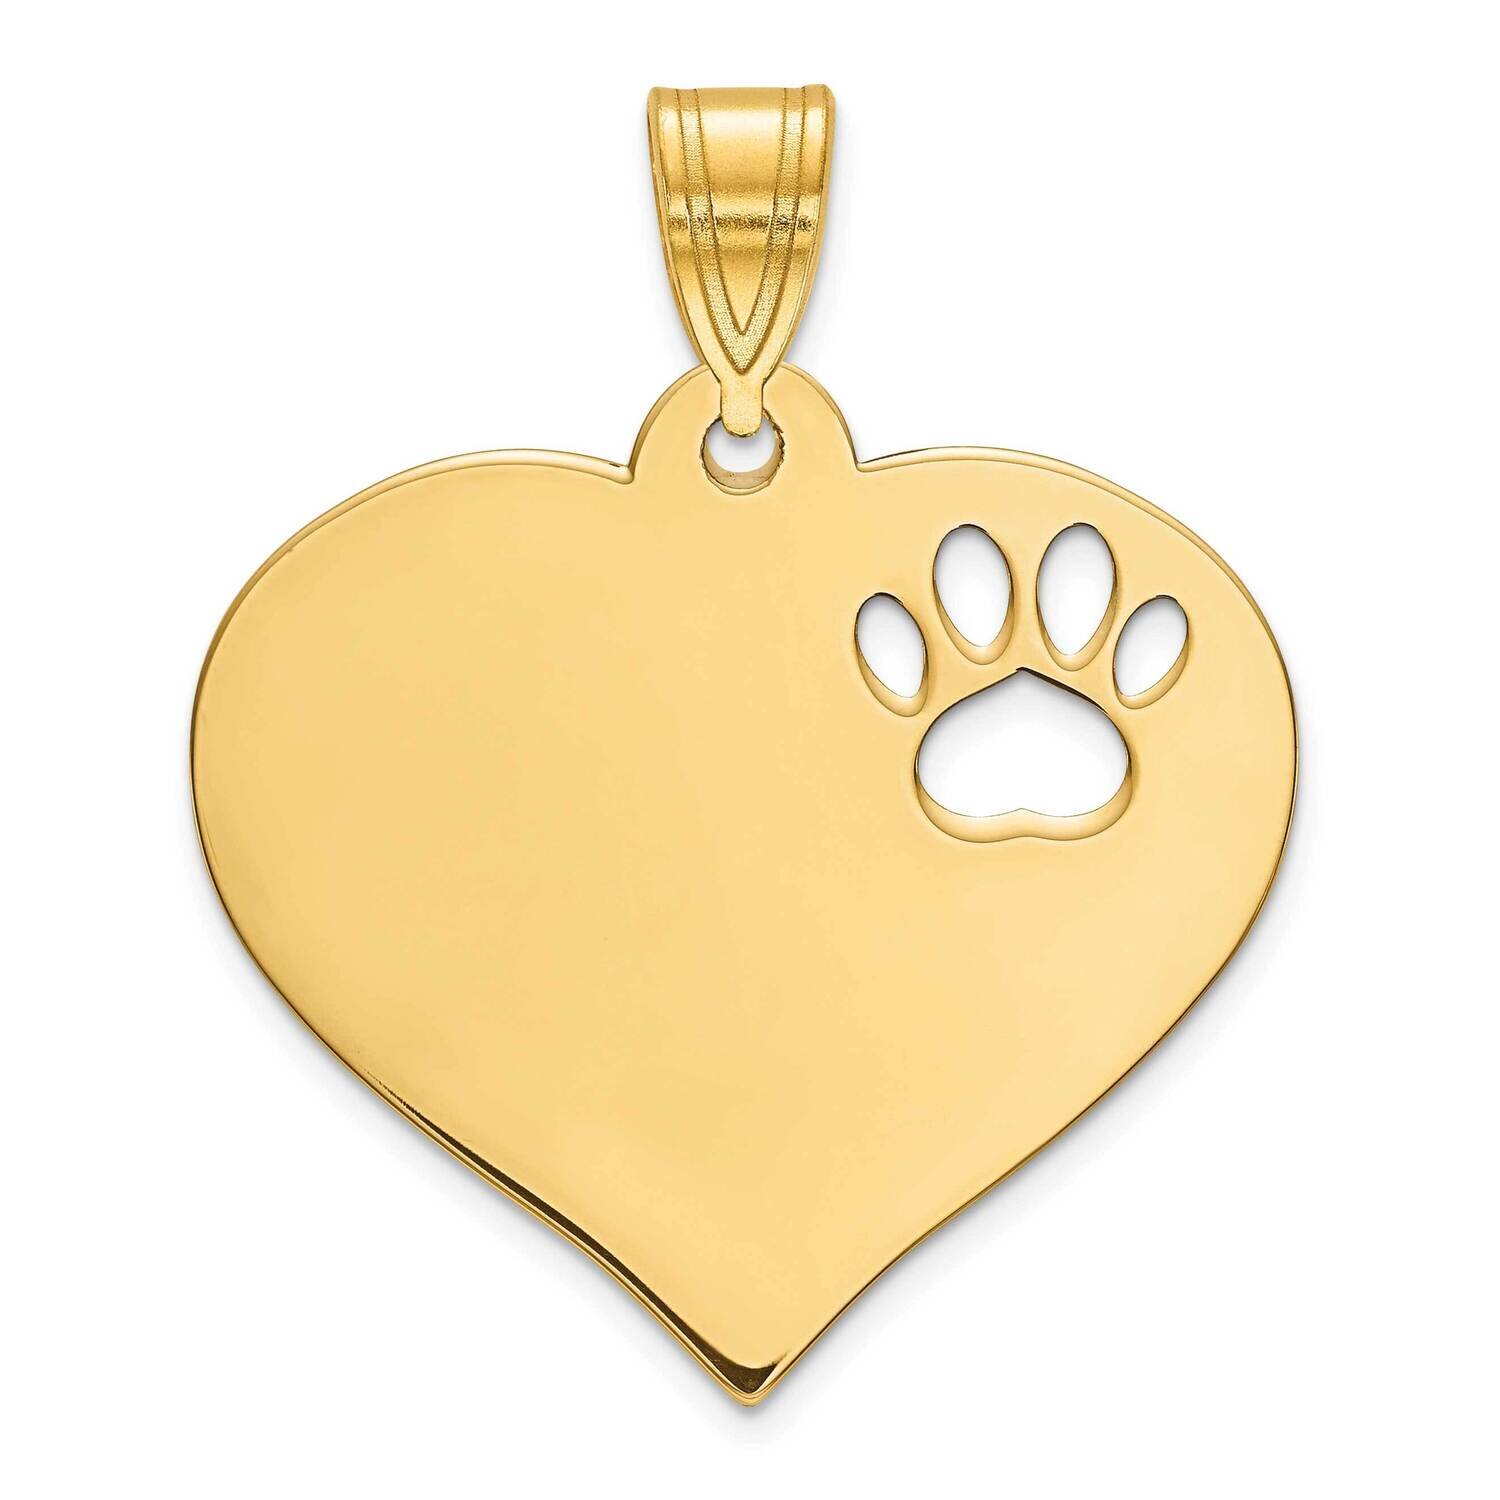 Heart Pendant with Pawprint Cutout Gold Plated Sterling Silver XNA768GP